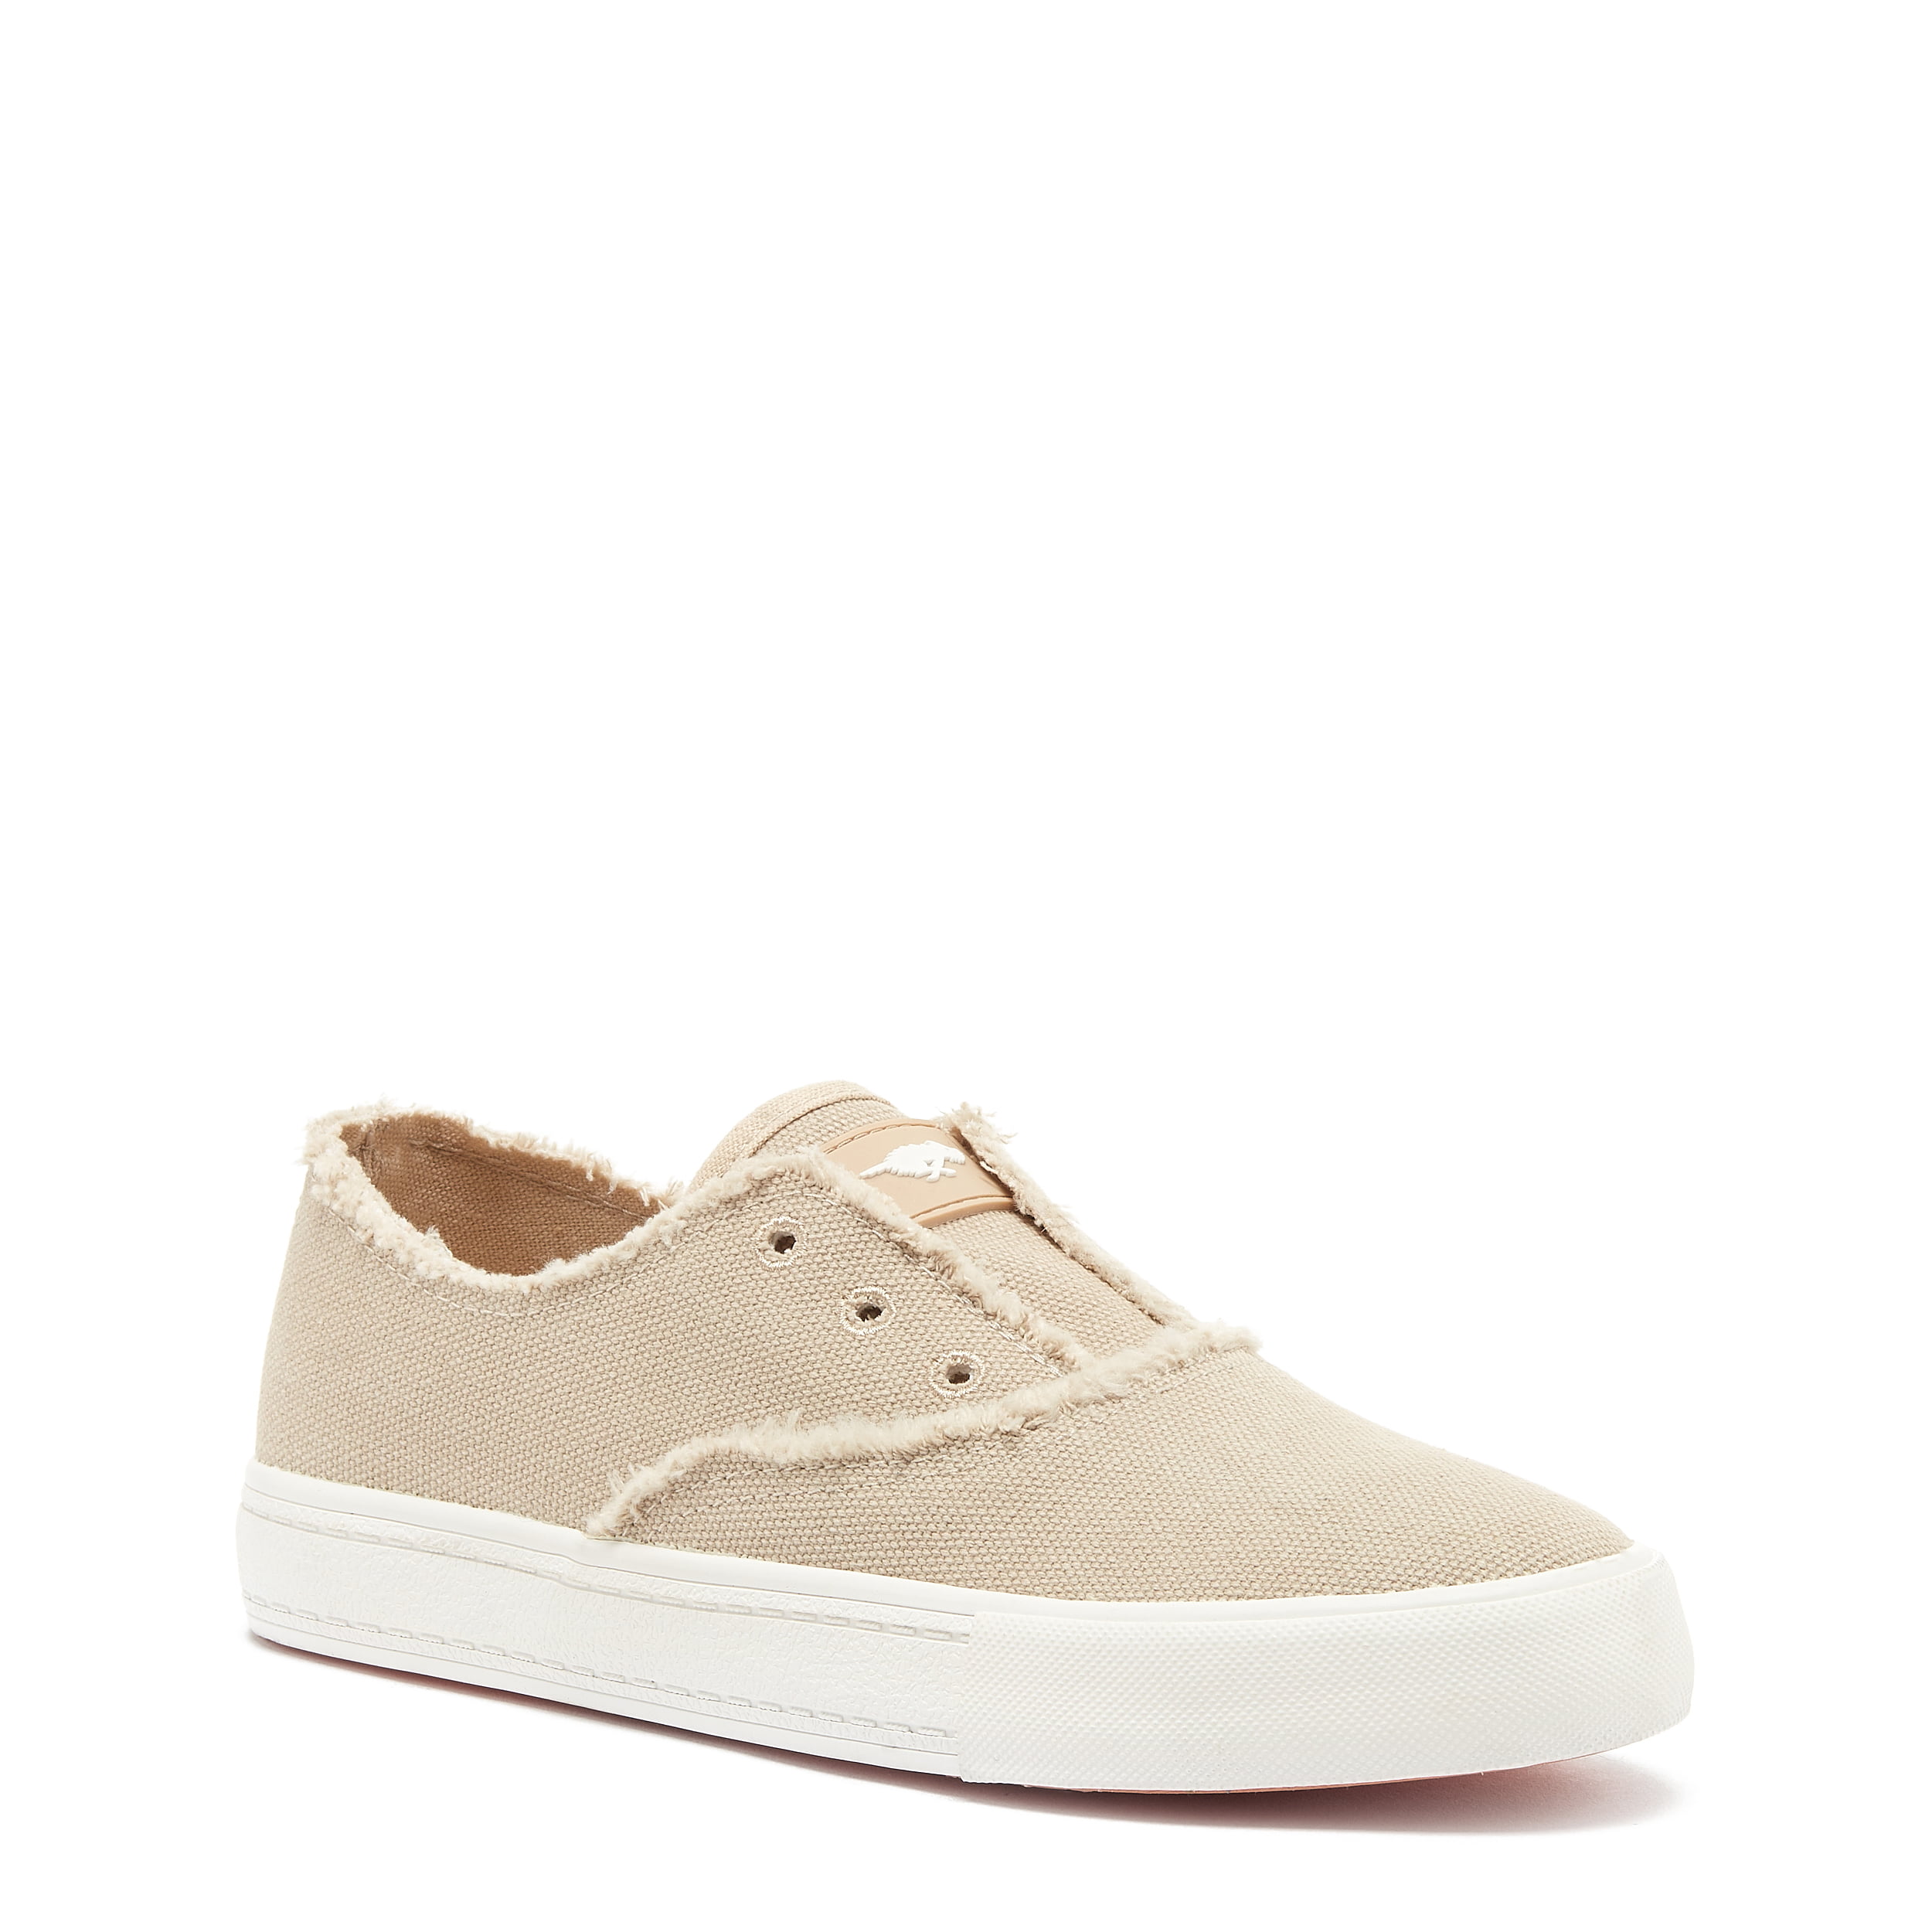 Rocket Dog Natural Cream Canvas Casual Sip On Beach Shoes Sizes UK 5 UK 6 